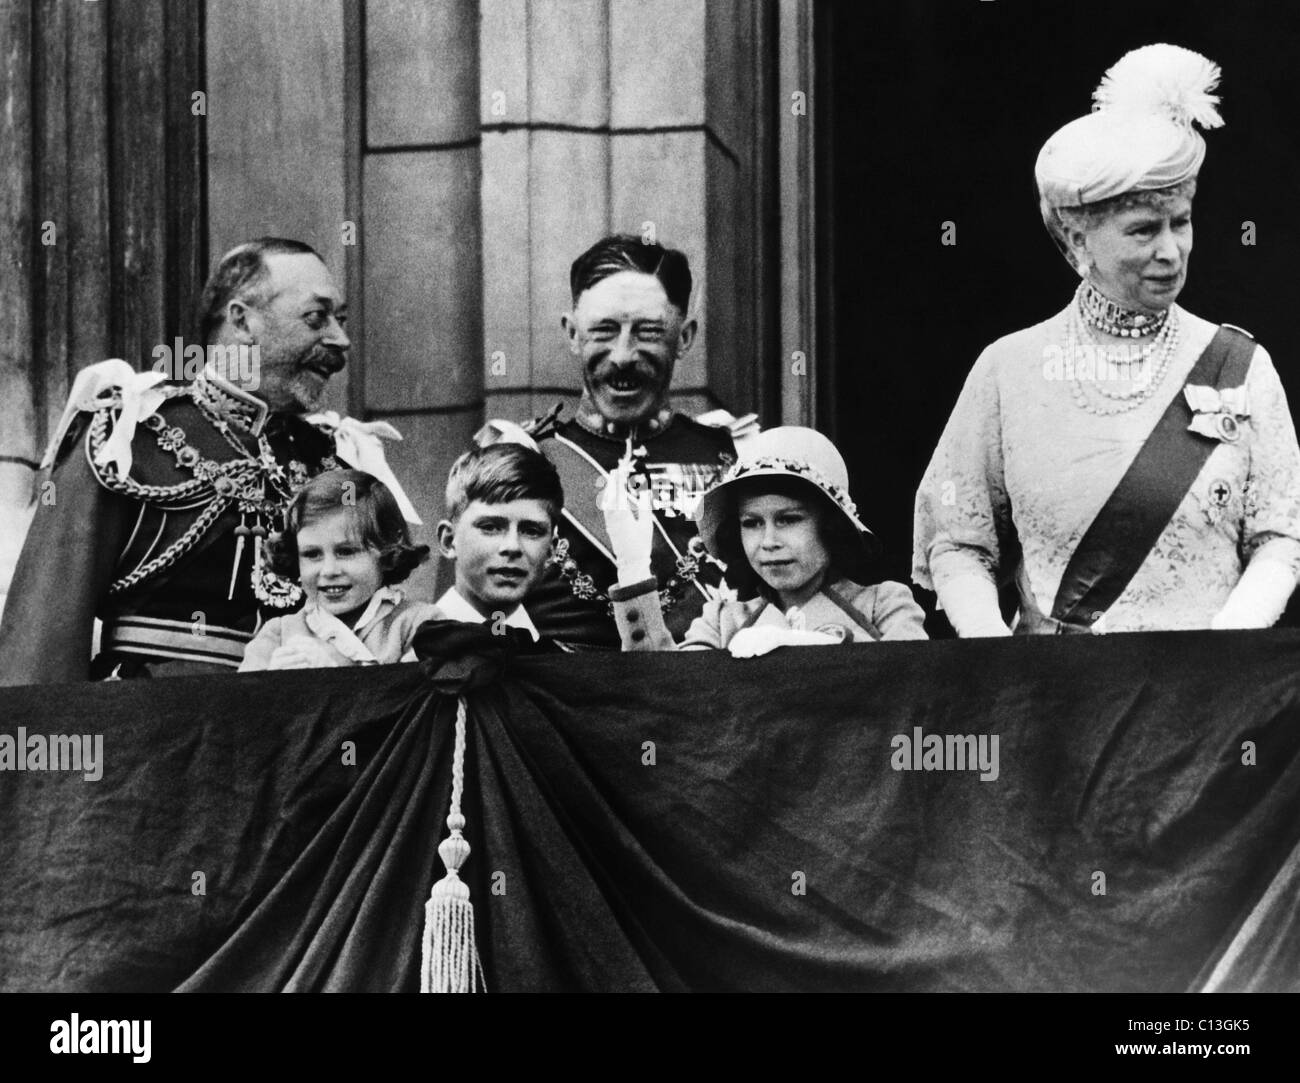 British Royal Family. From left: British King George V, Future Countess of Snowdon Princess Margaret, Gerald Lascelles, Earl of Stock Photo